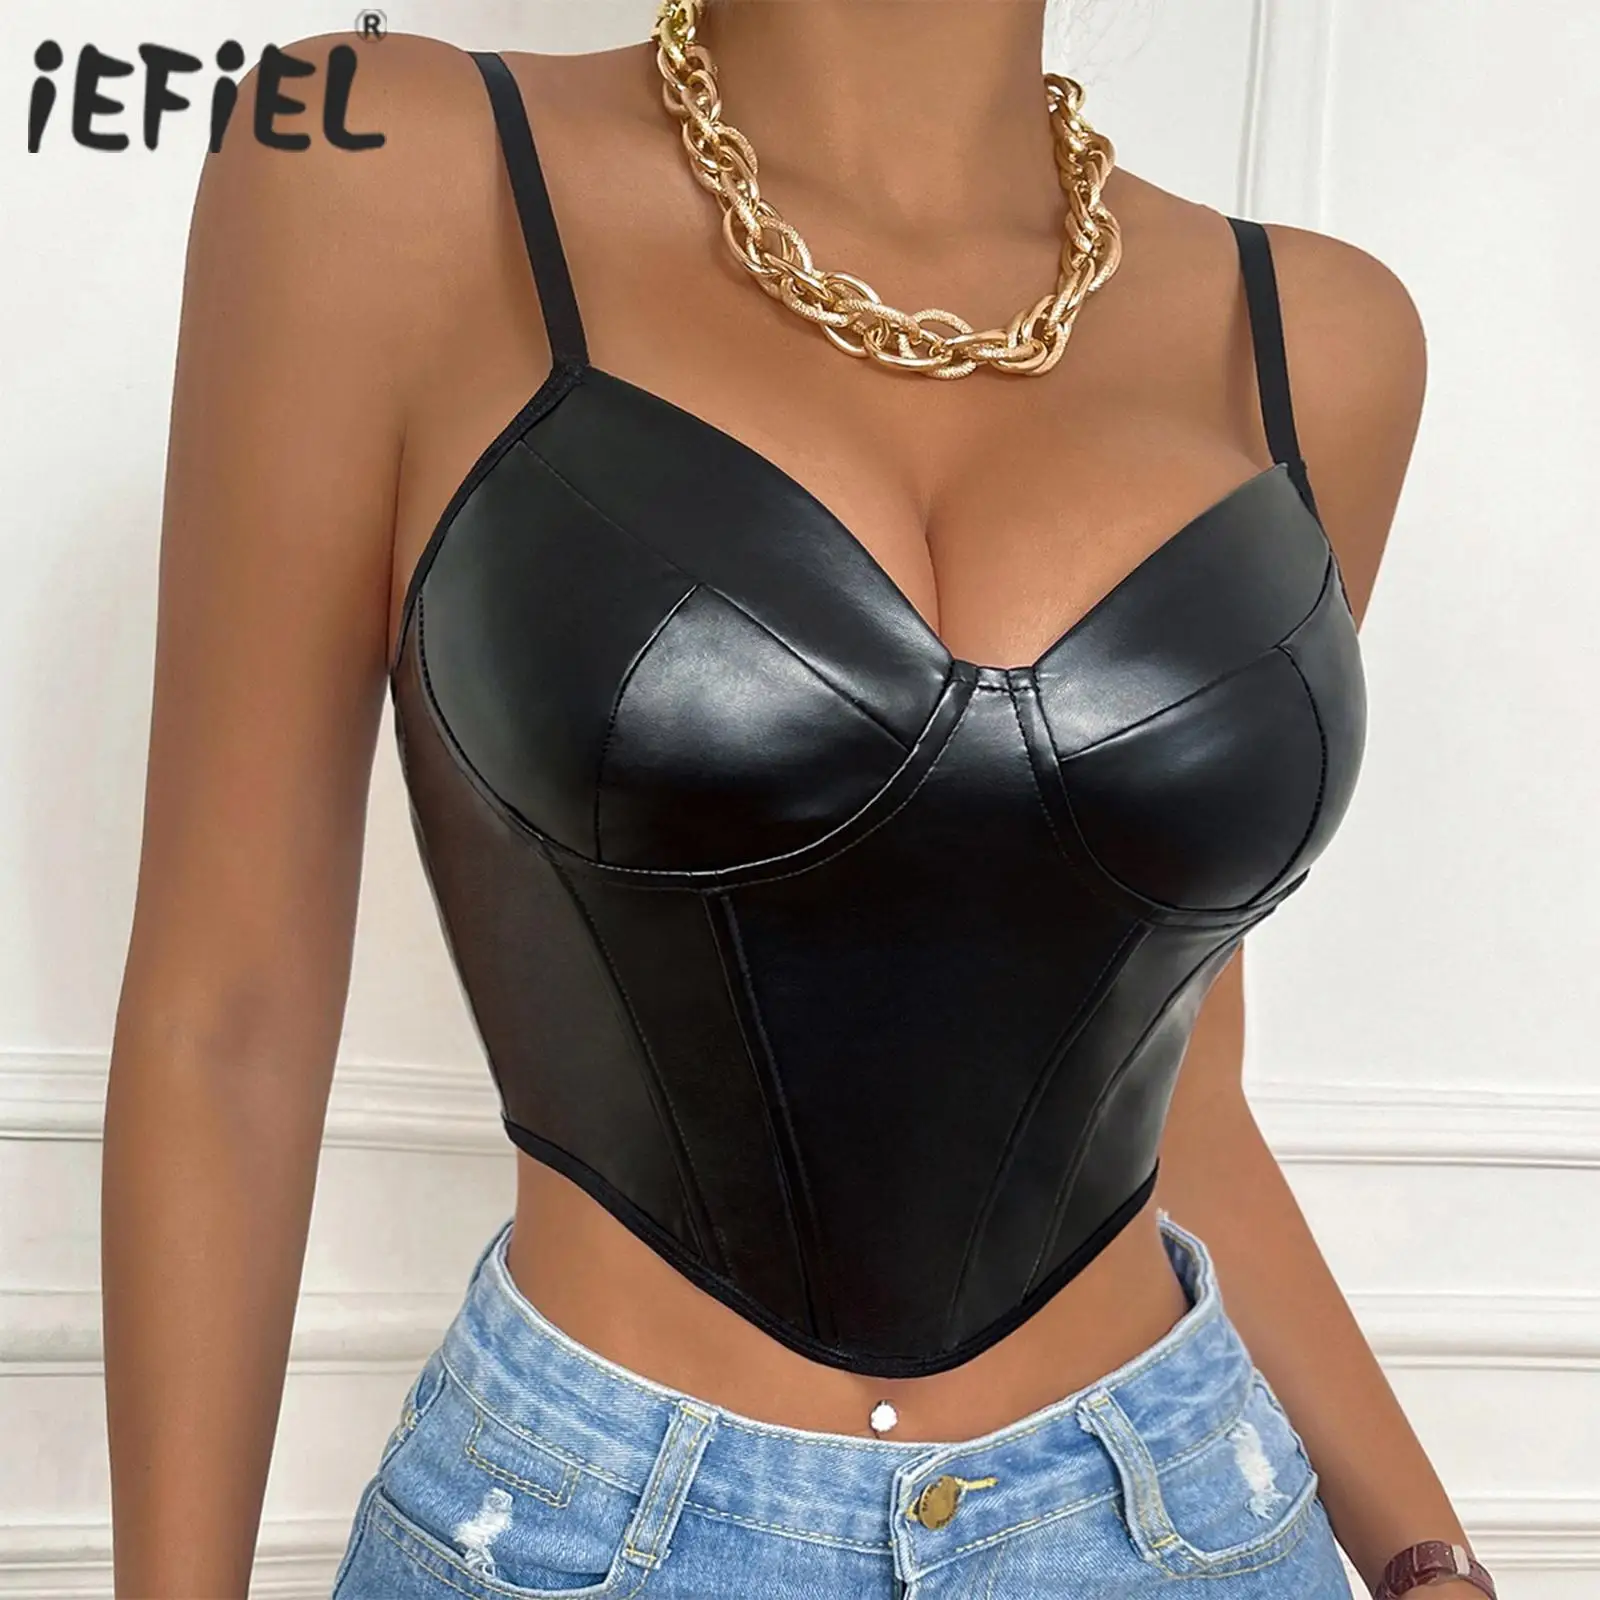 

Womens Low-cut PU Leather Exotic Tanks Camisole Adjustable Straps Crop Top Asymmetrical Hem Bustier Tops Rave Dance Top Clubwear